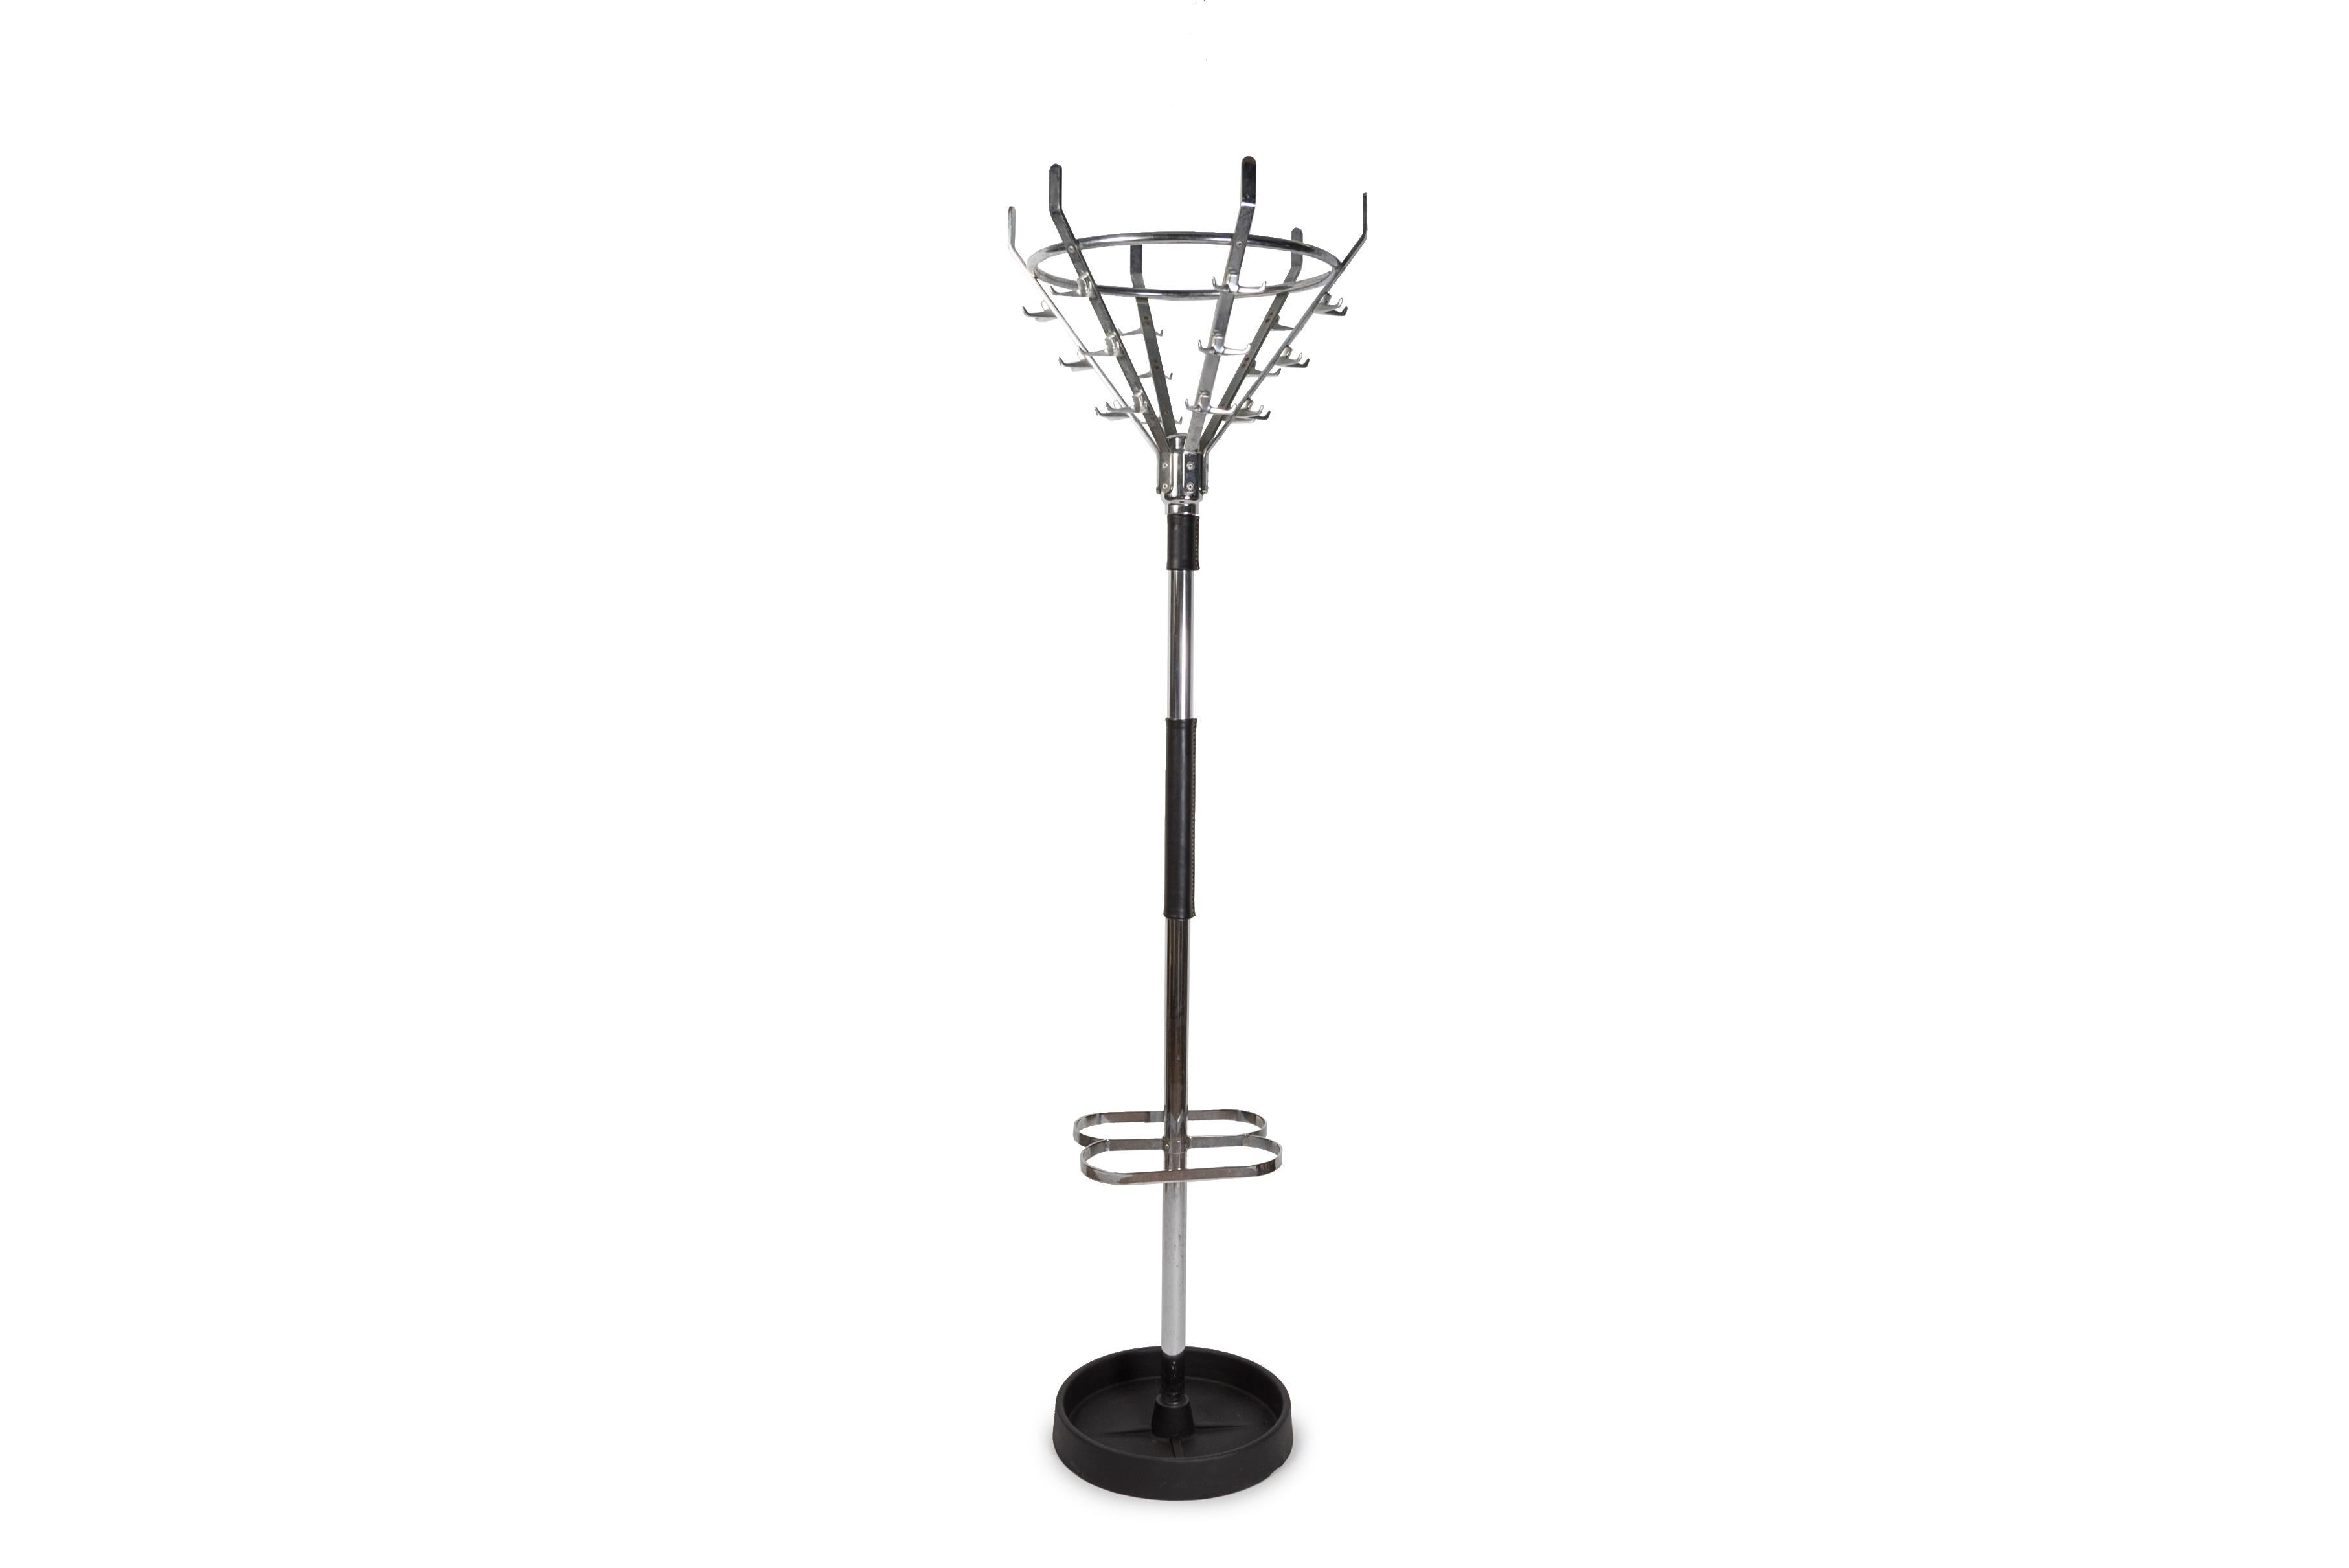 1950's Stitched leather and chromed metal coat stand by Jacques Adnet
France.